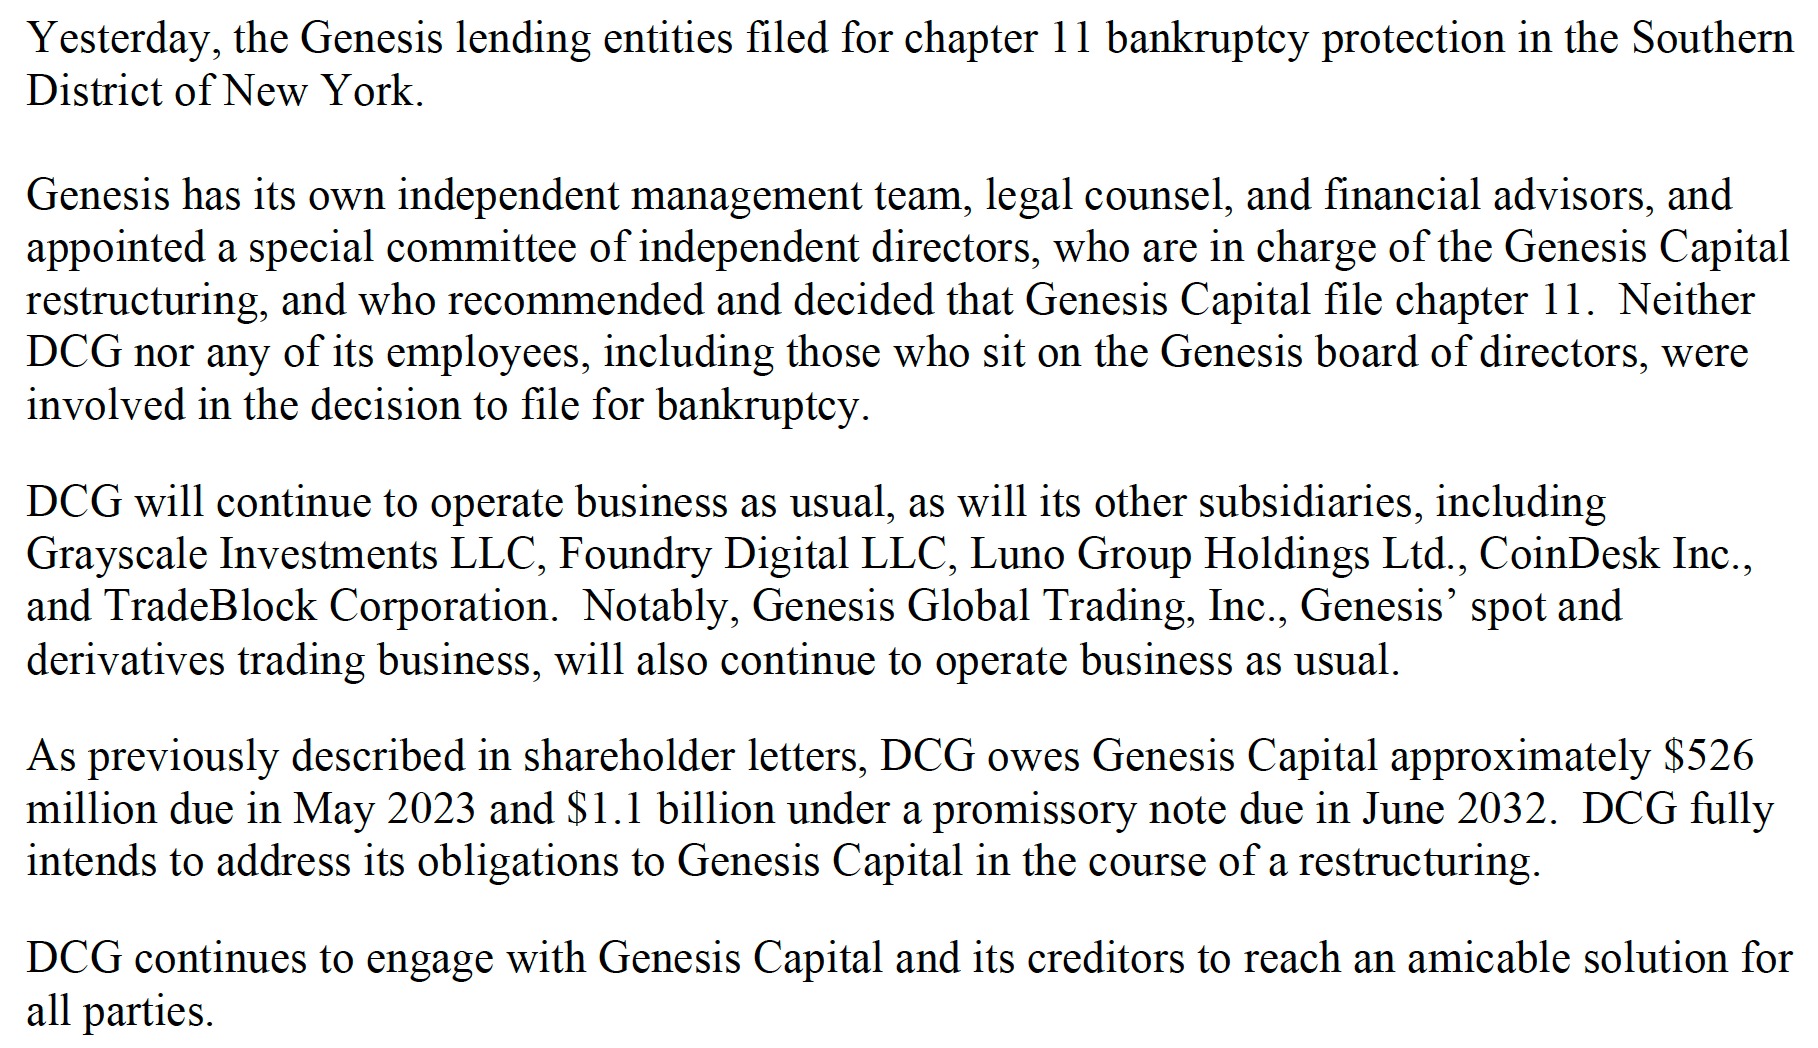 DCG's response to Genesis's bankruptcy